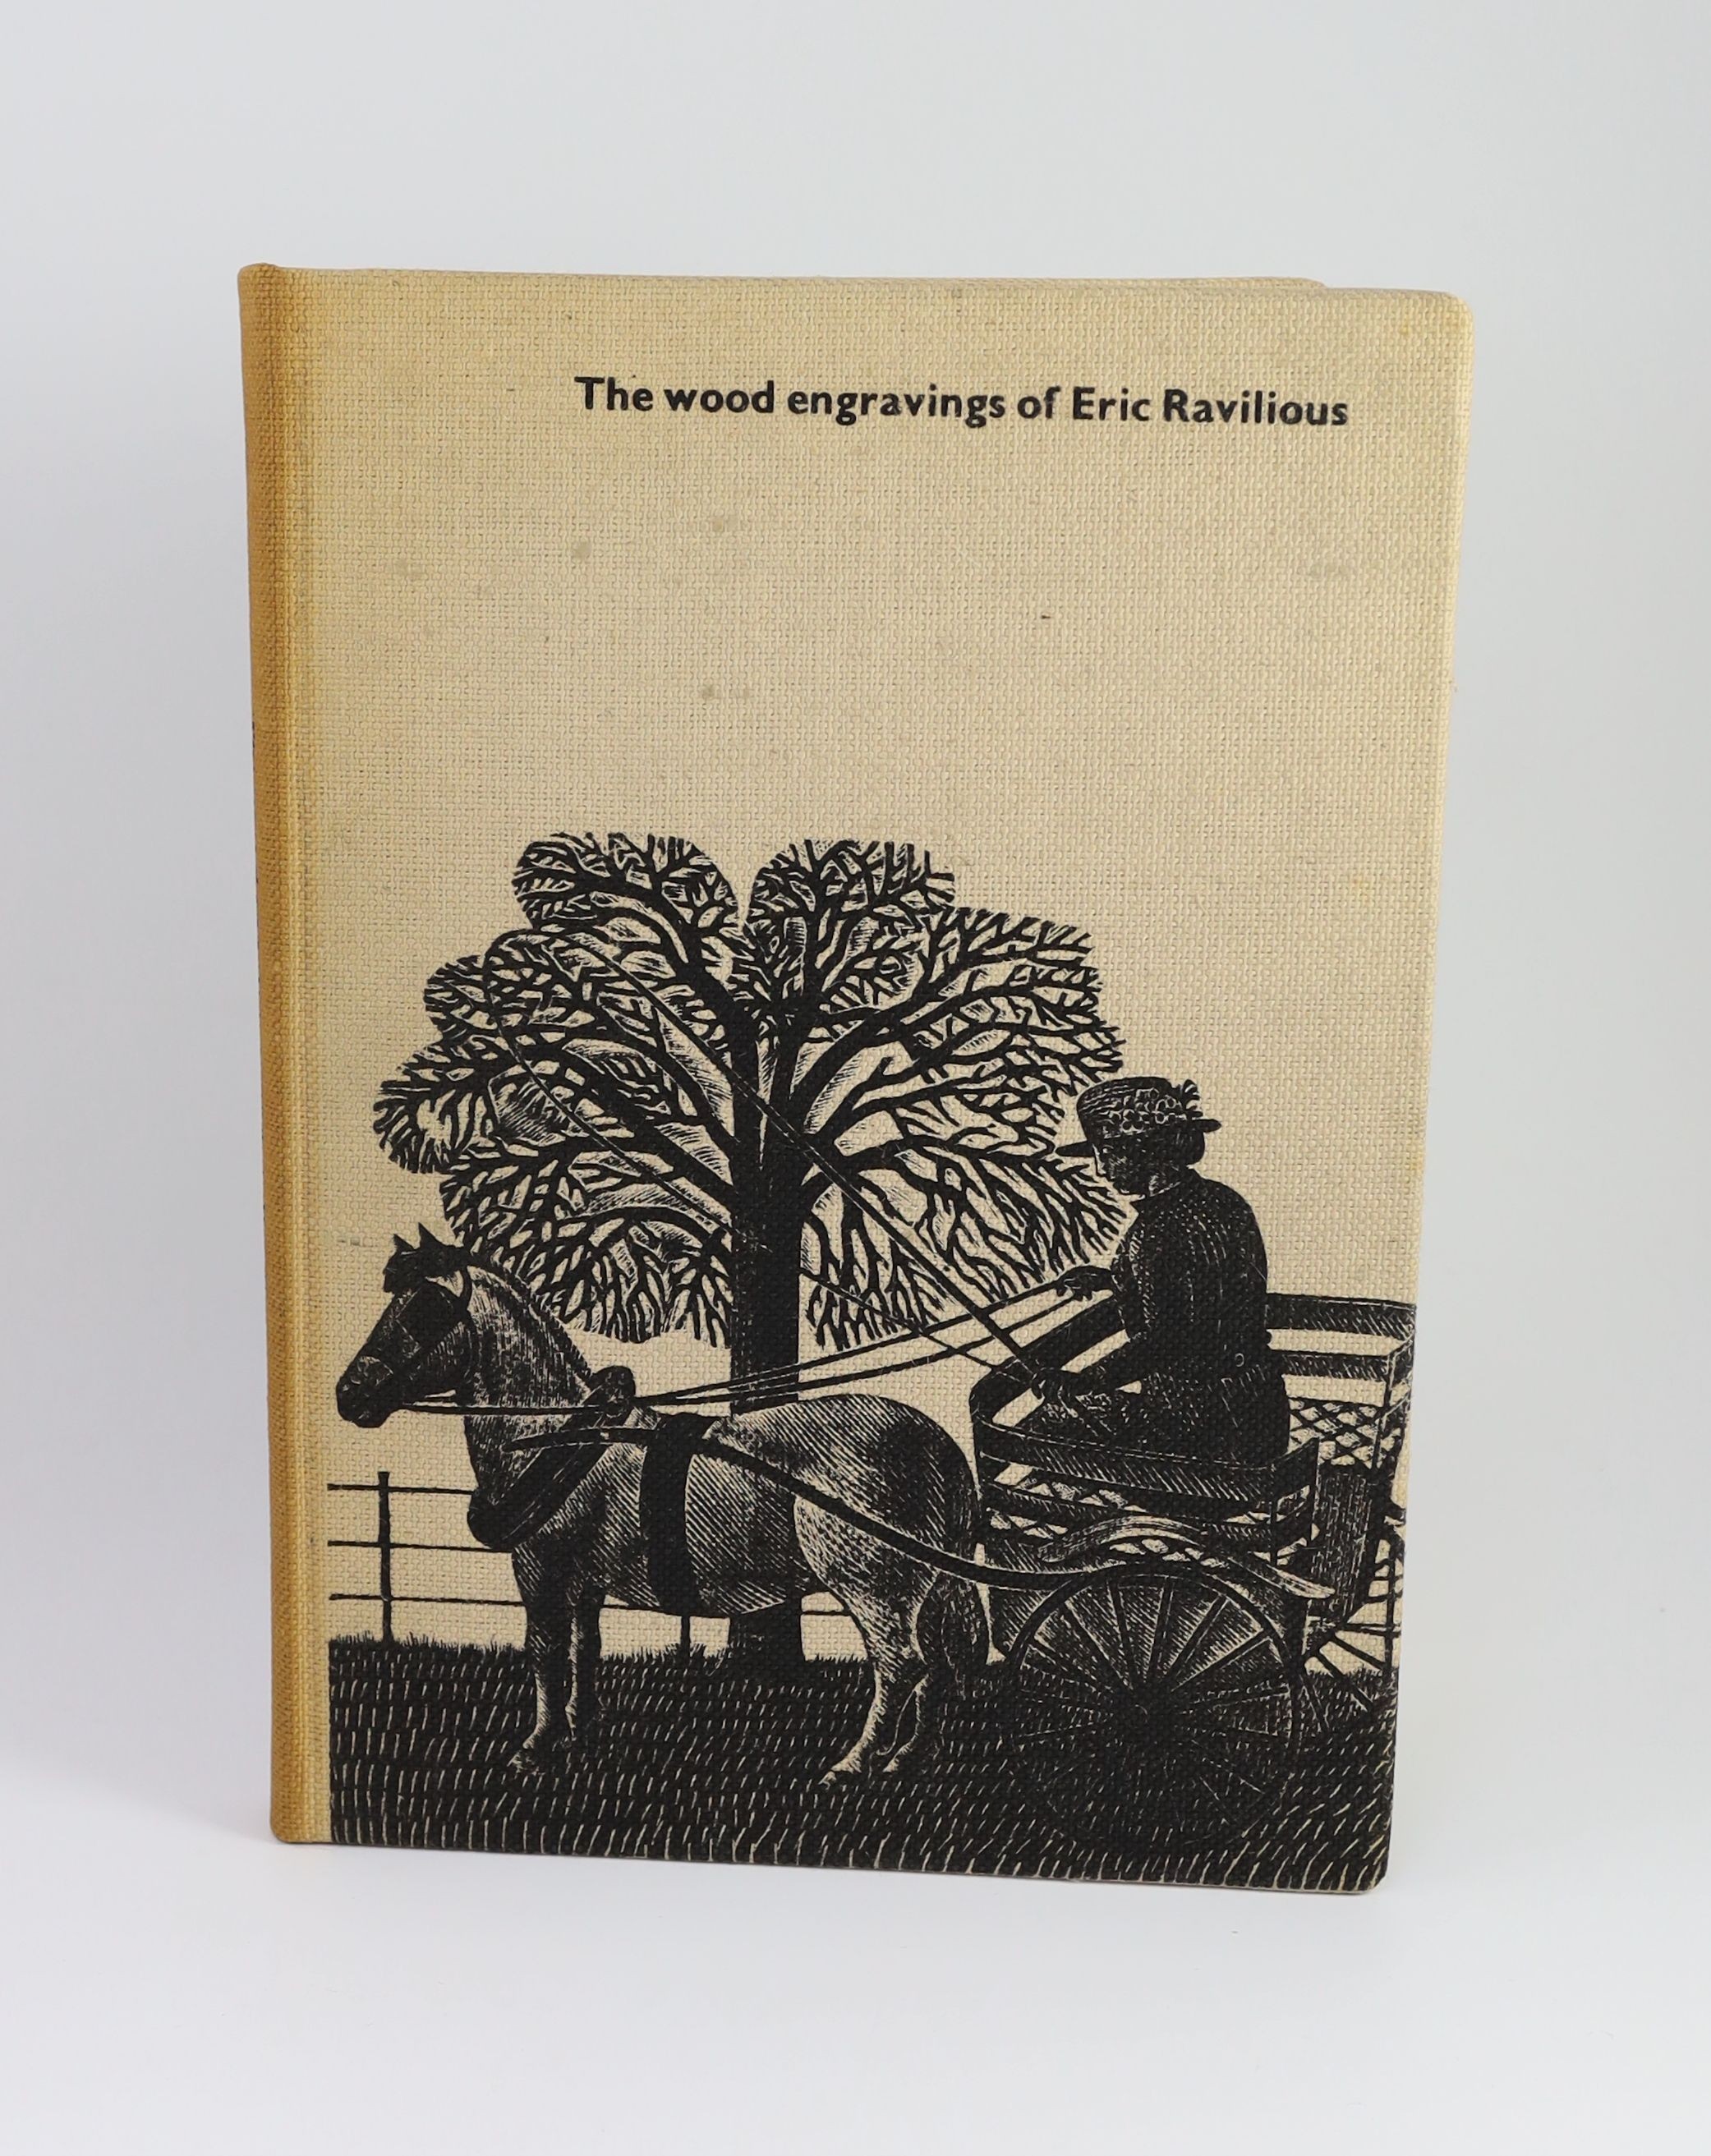 Ravilious, Eric [and] Richards, J. M. - The Wood Engravings of Eric Ravilious. Limited ed. One of 500. Complete with 113 plates most with numerous illustrations and 3 of which are folding. With folding index and limitati